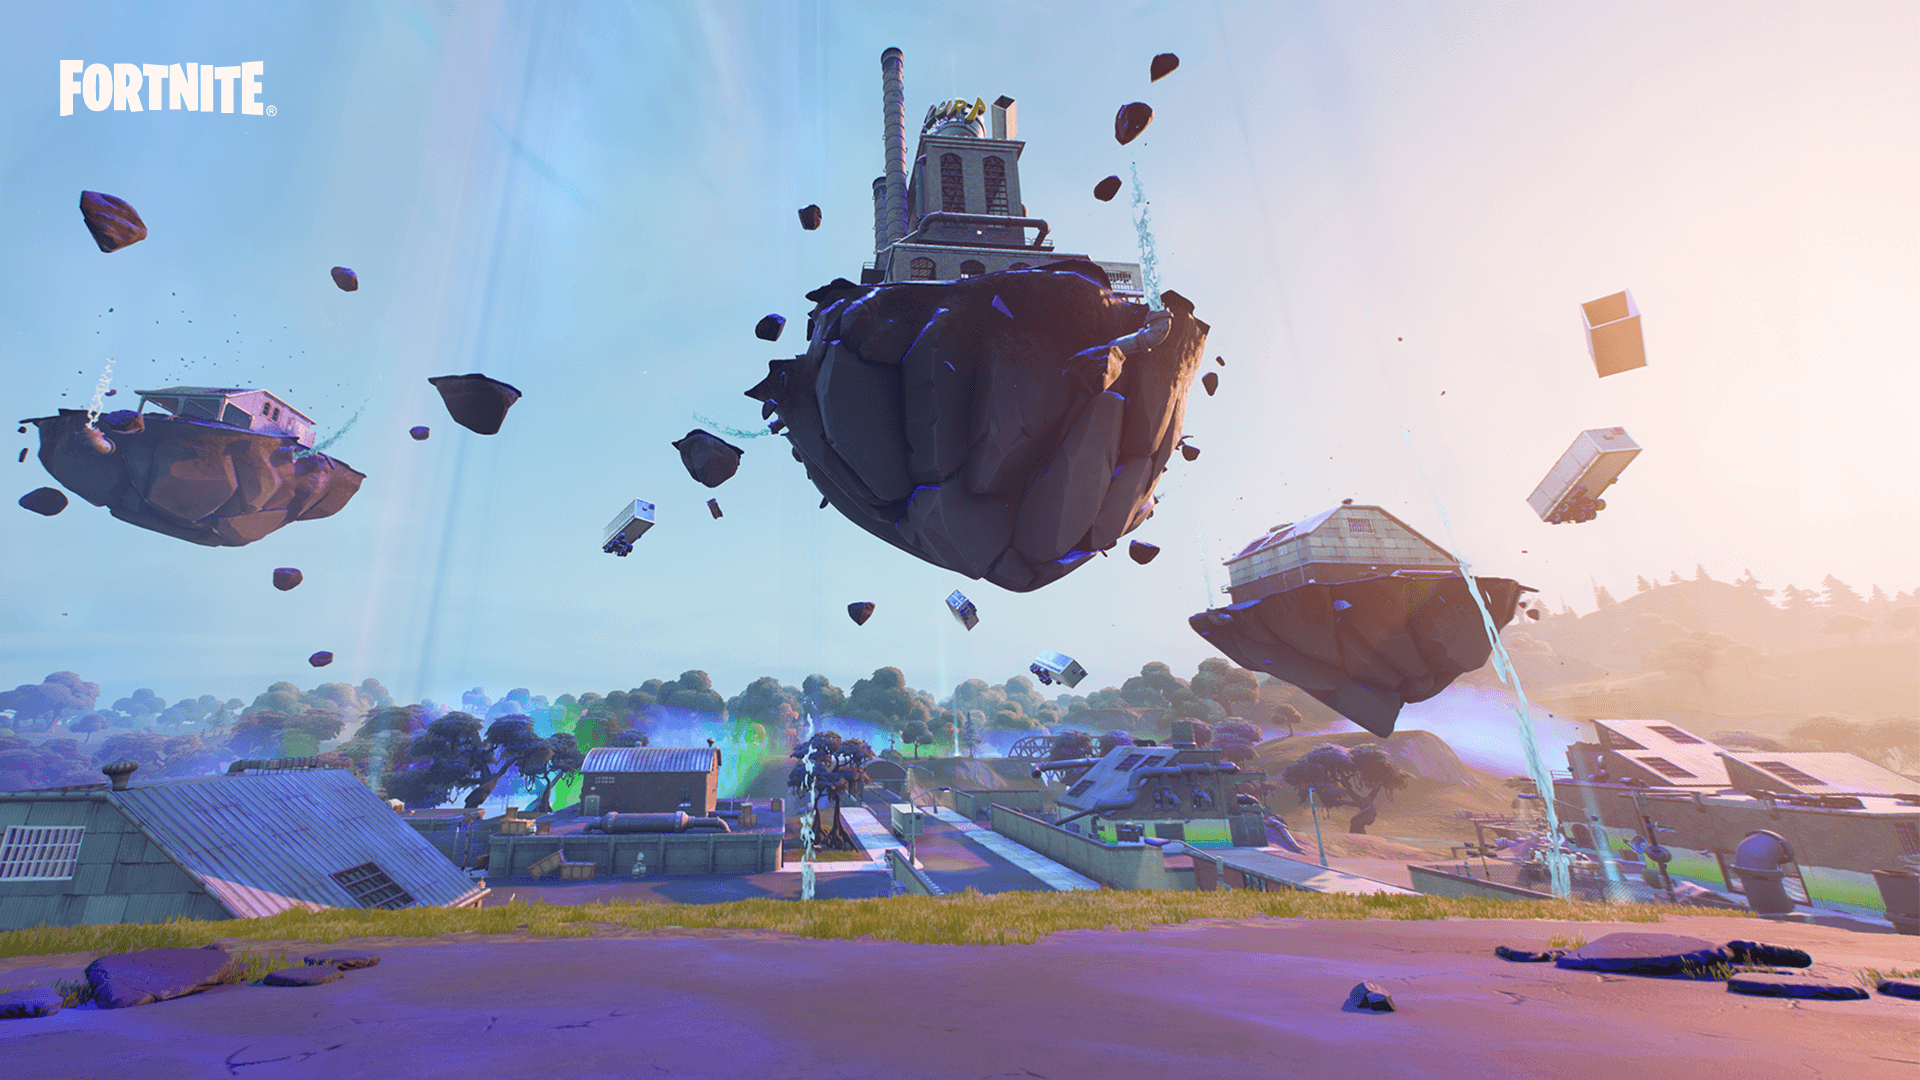 Fortnite Patch v17.30: What's New?